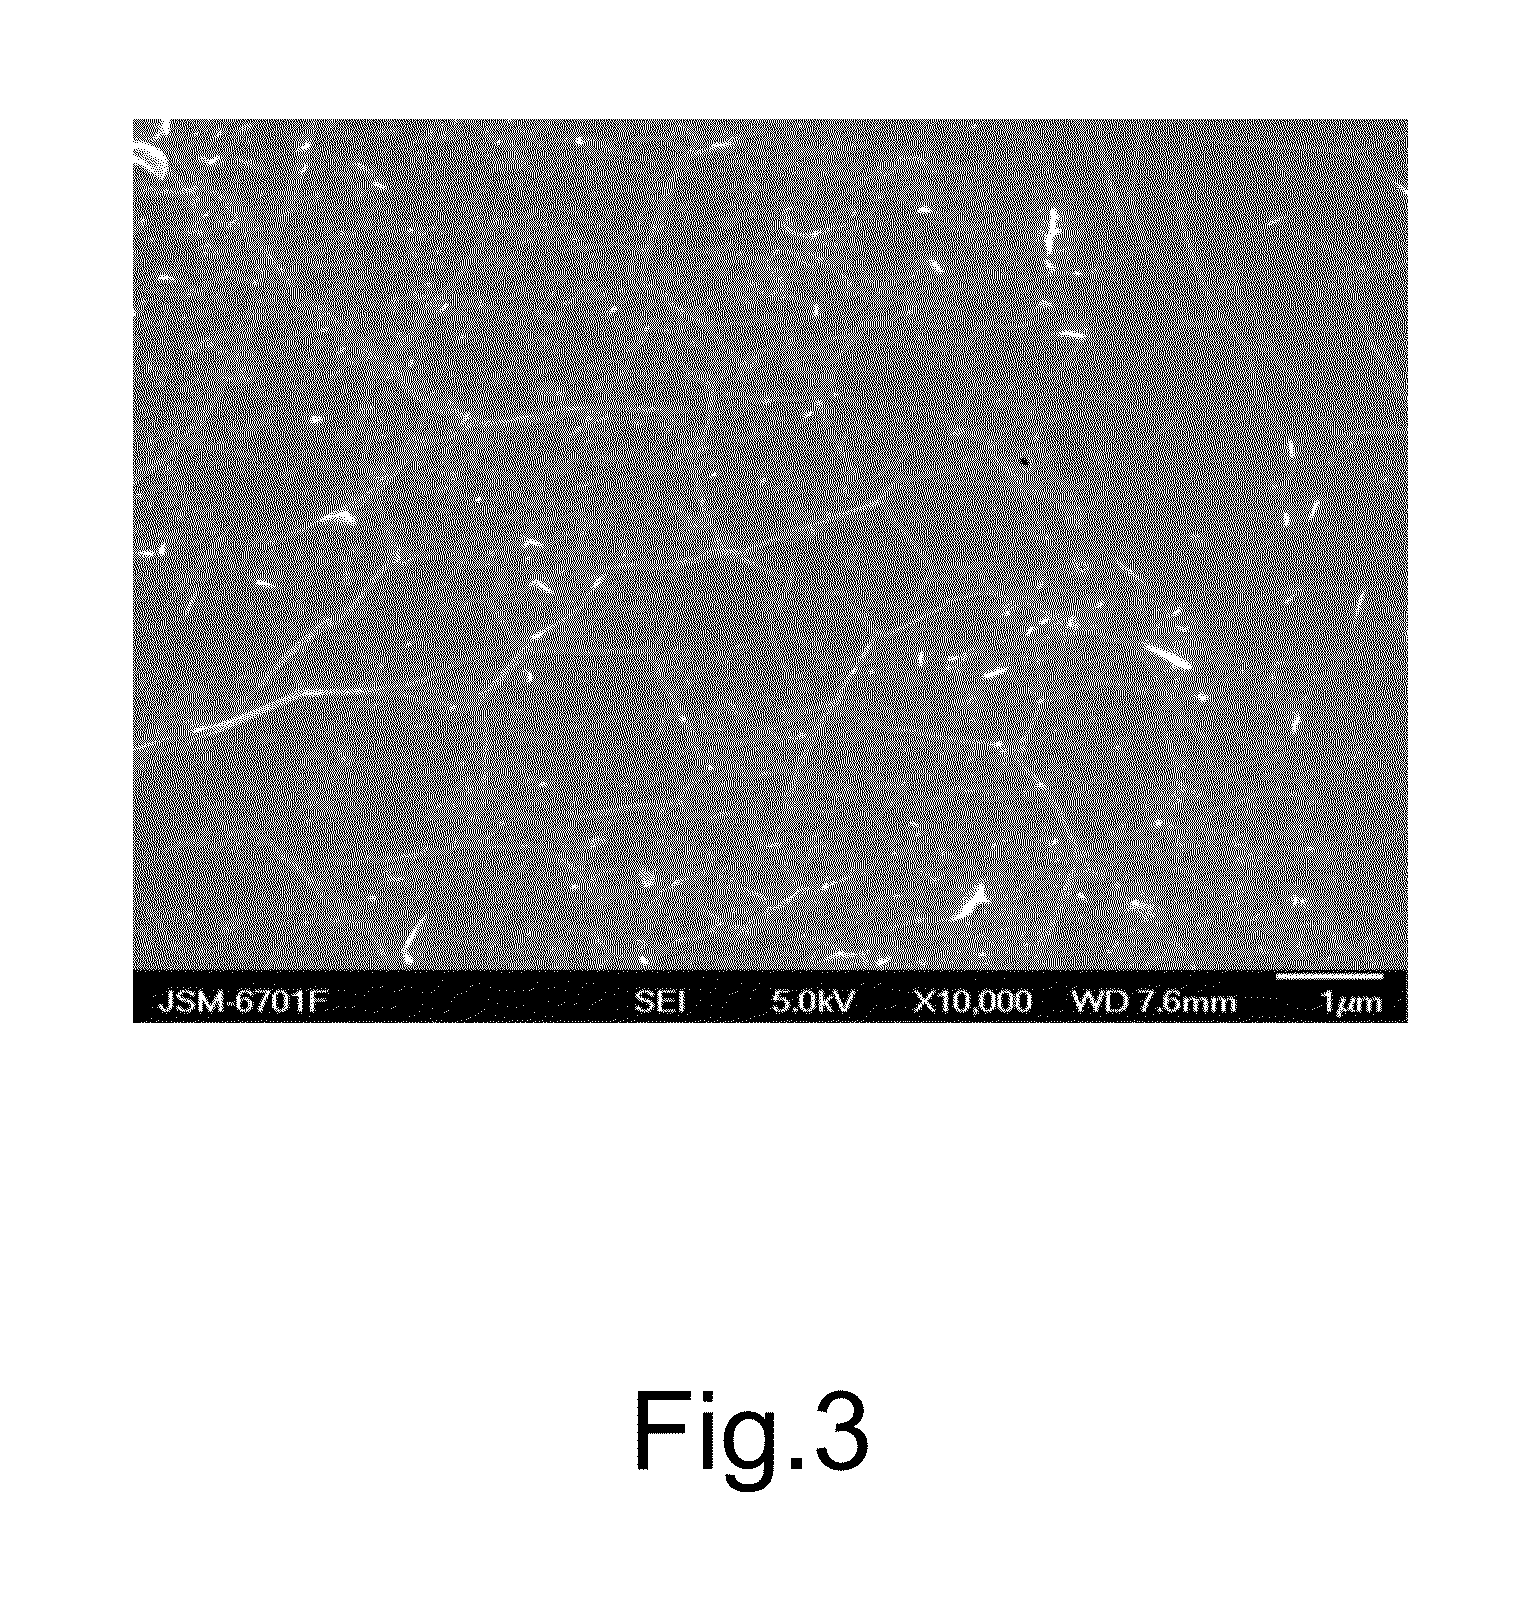 Process for Preparing Graphene on a SiC Substrate Based on Metal Film-Assisted Annealing